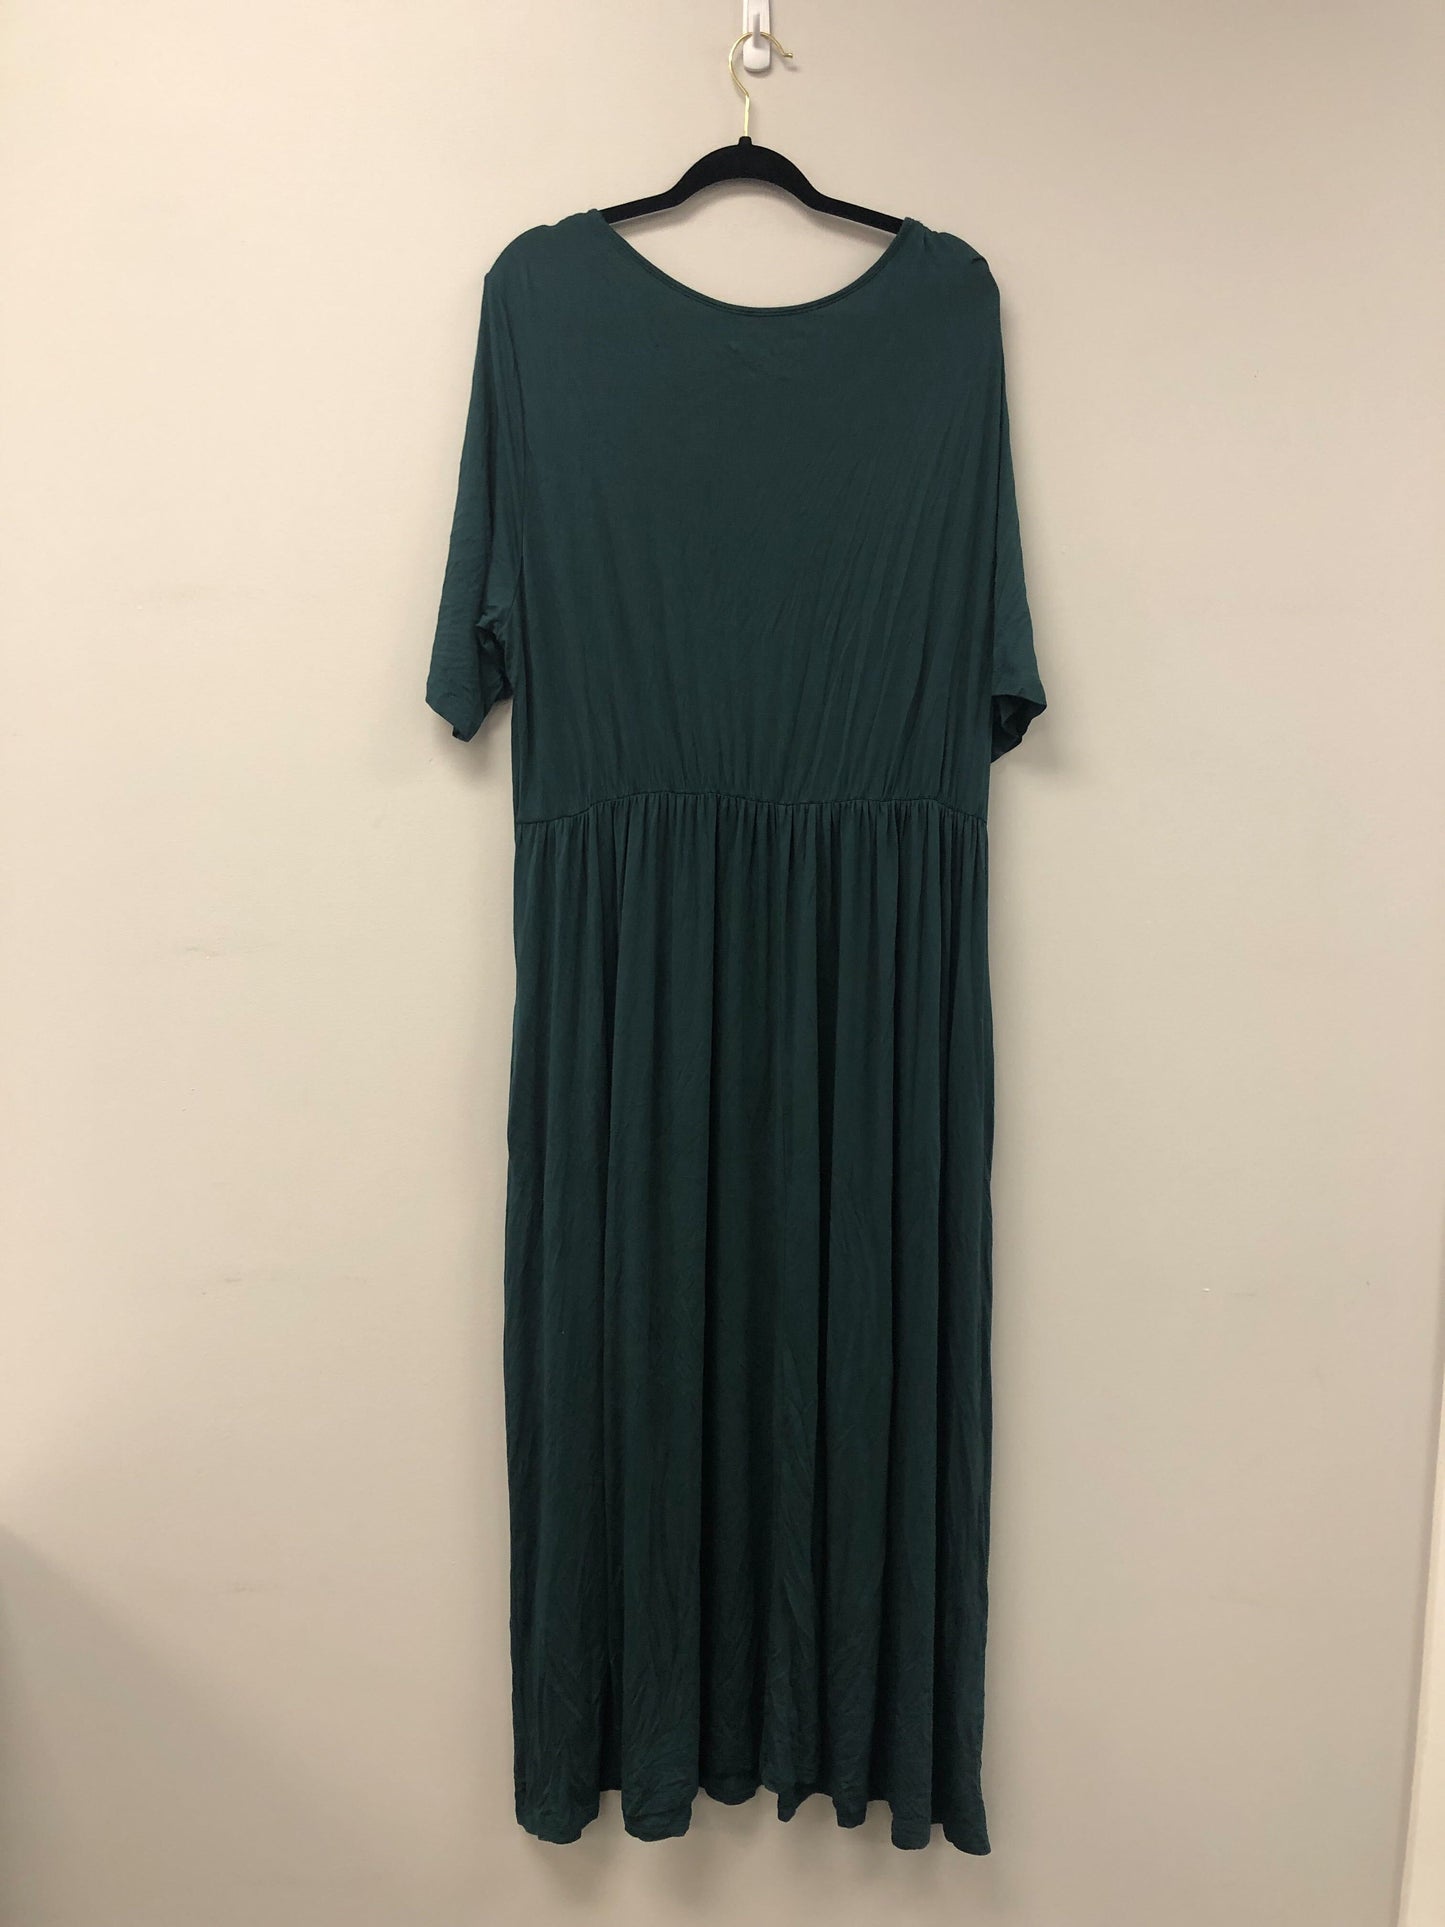 Outlet 5579 - Latched Mama Front Knot Nursing Maxi Dress - Forest Green - 3X